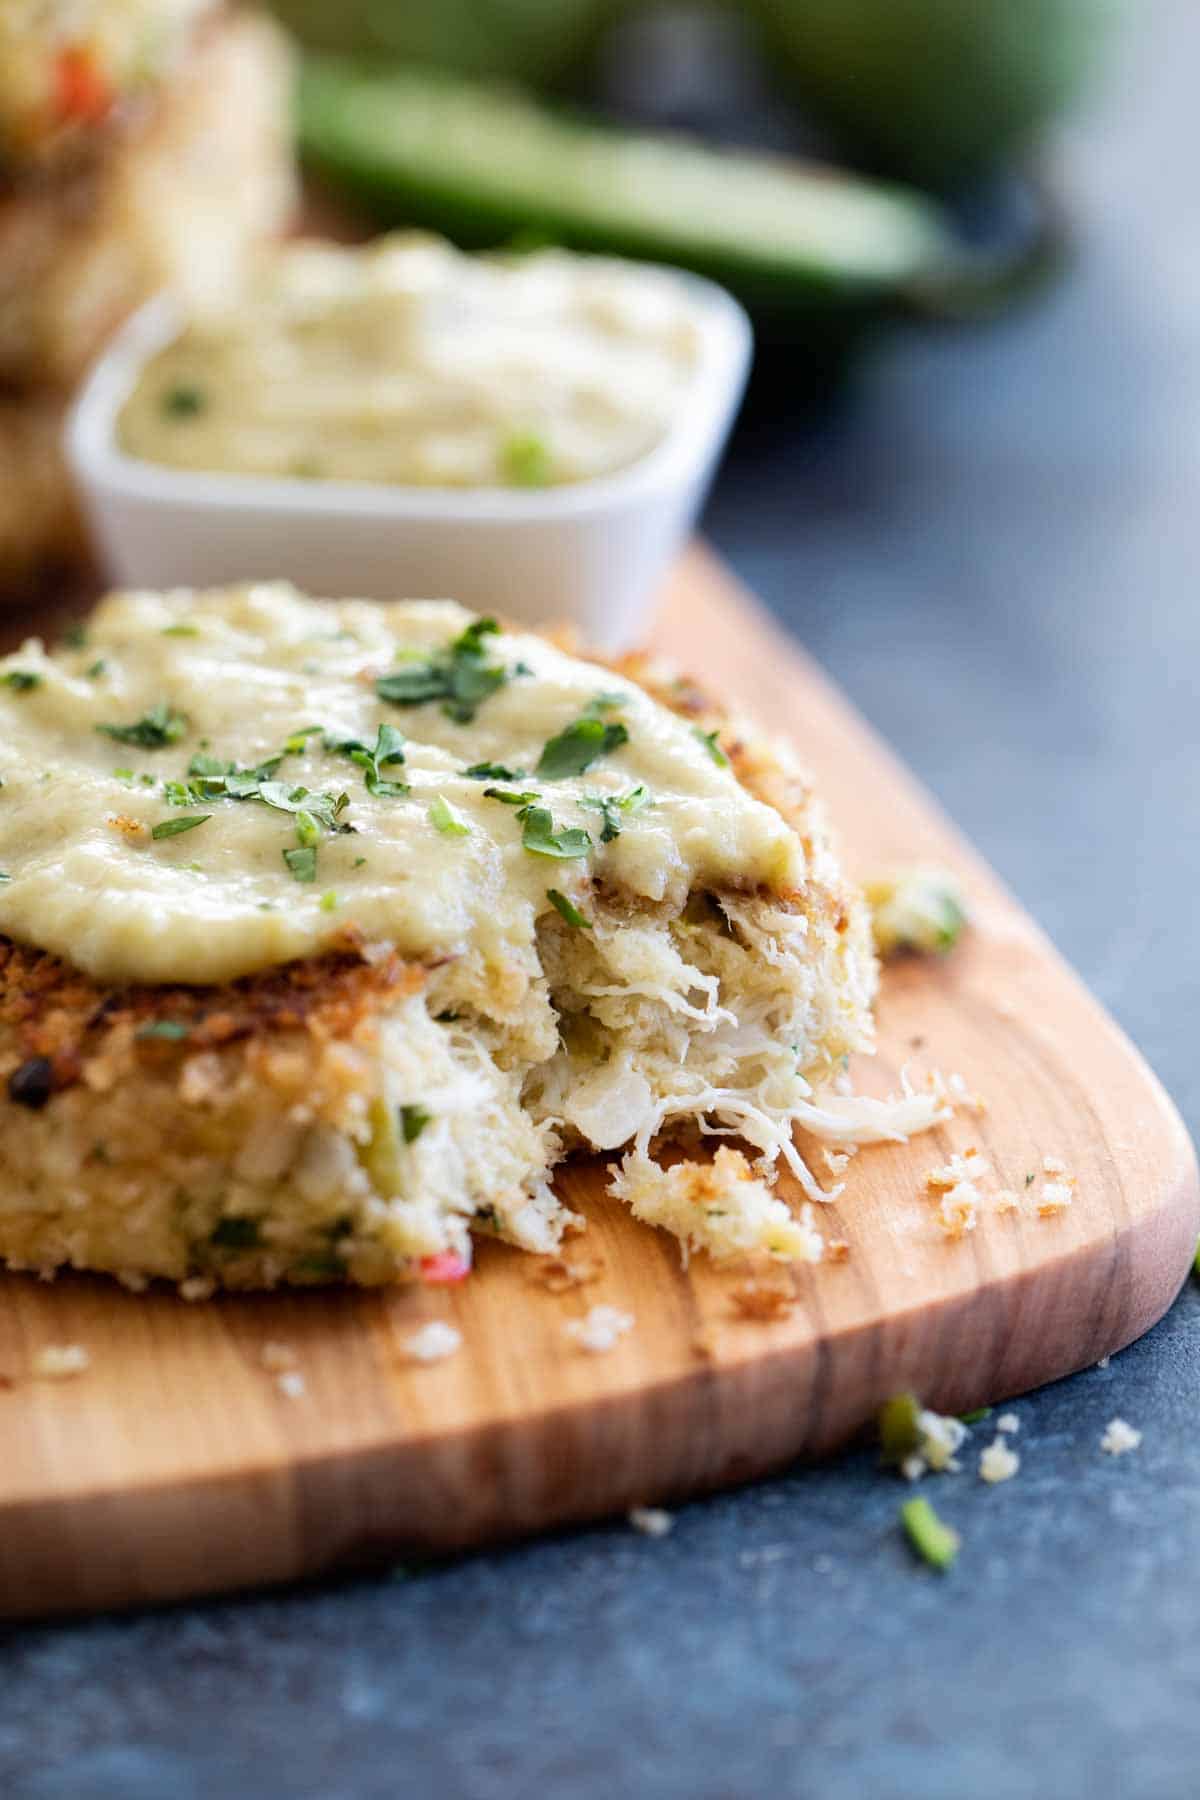 Green chile crab cake with a bite taken from it.